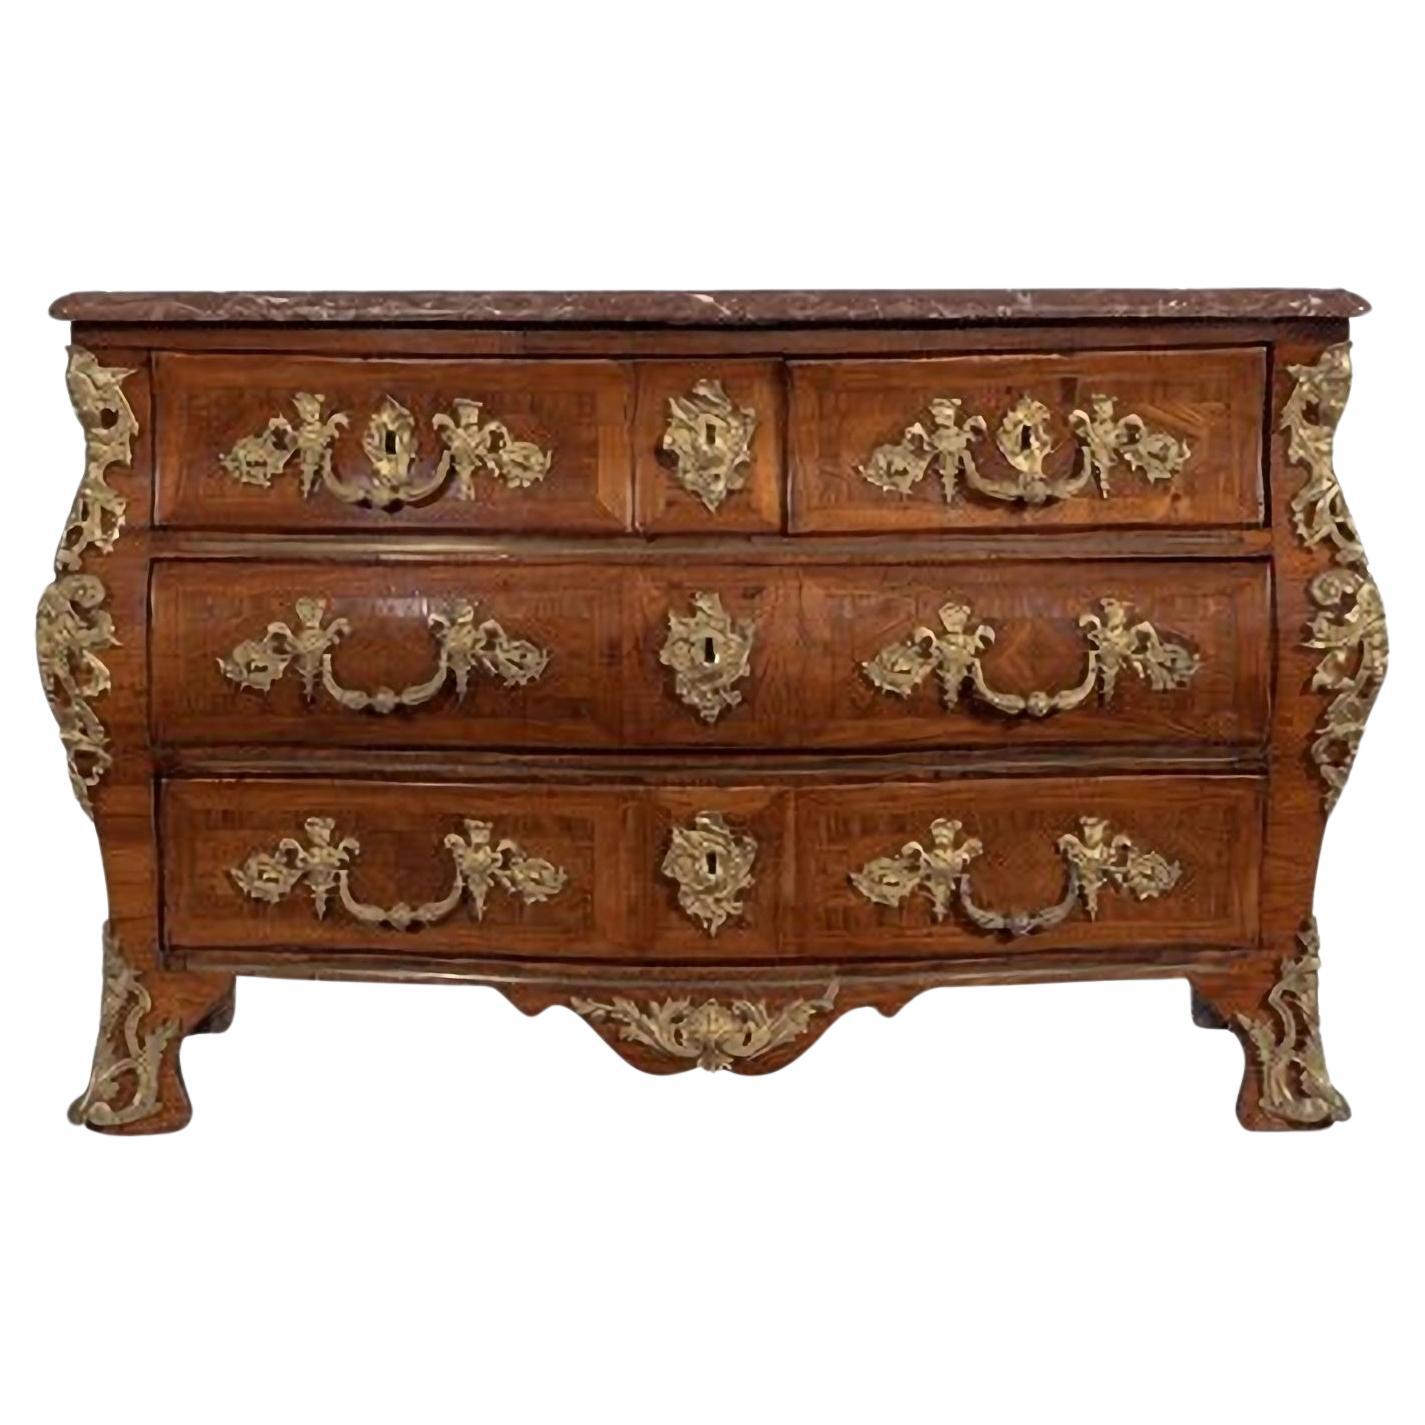 An Important Serpentine Fronted Tombeau Shaped Kingwood Commode, 18th Century